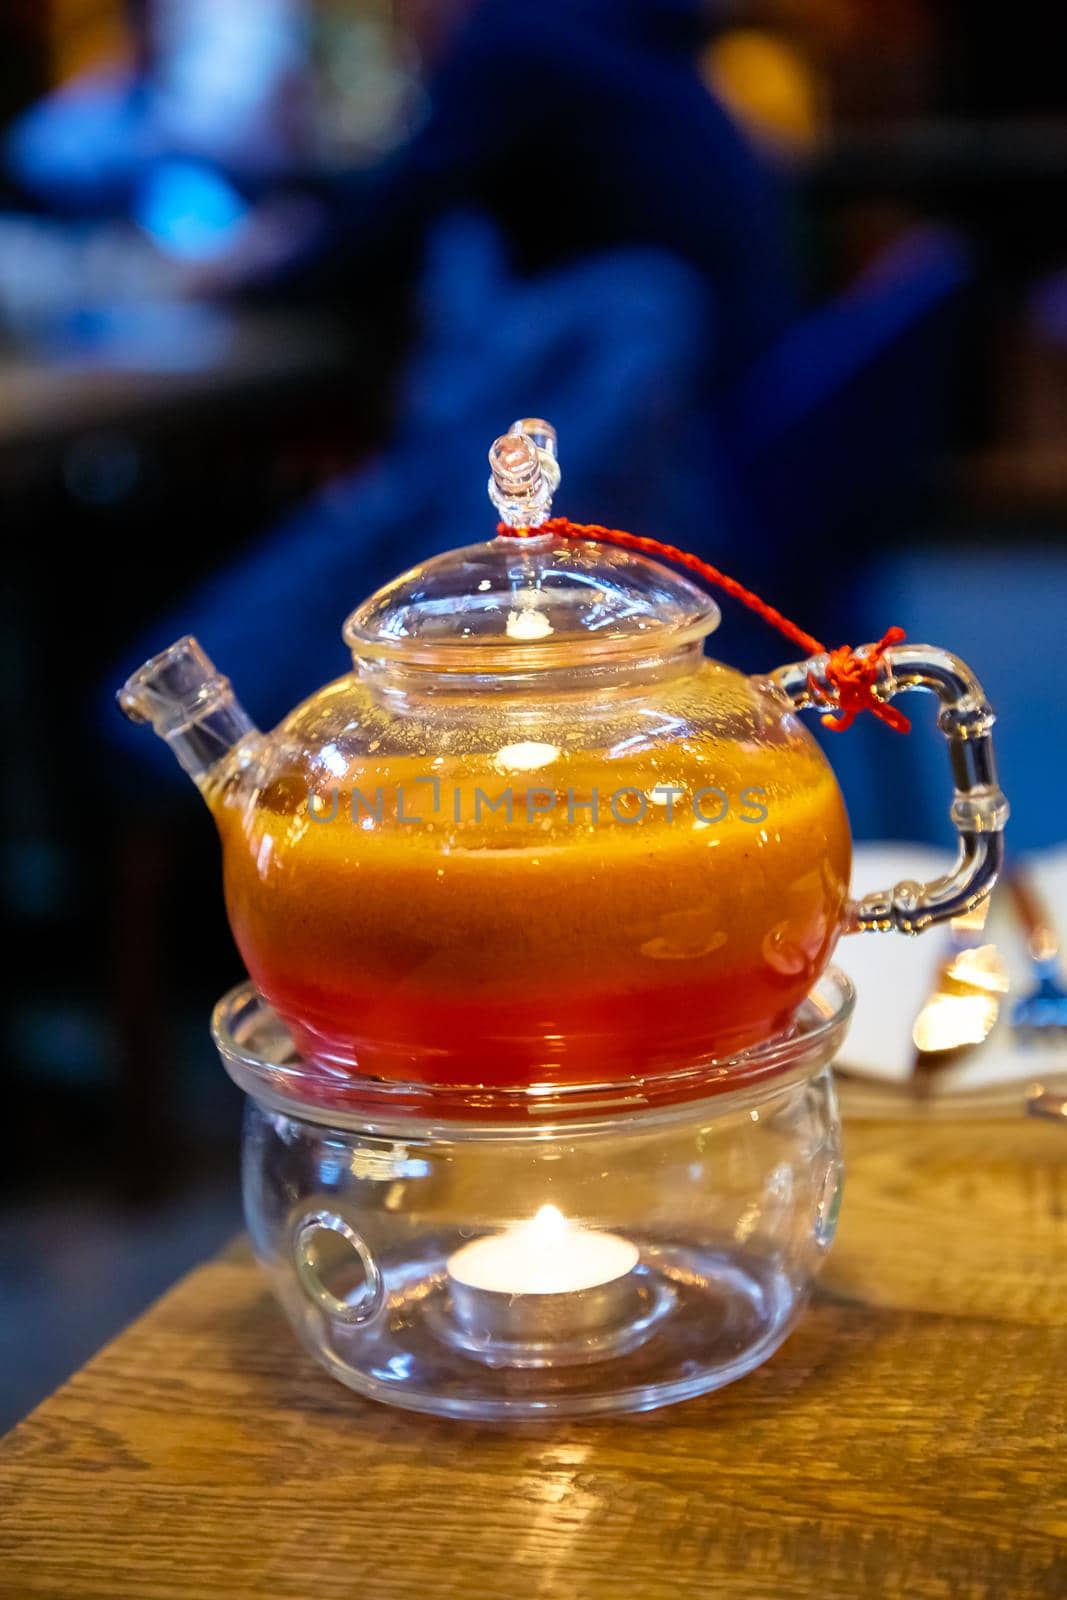 Red tea with sea buckthorn in a glass teapot.